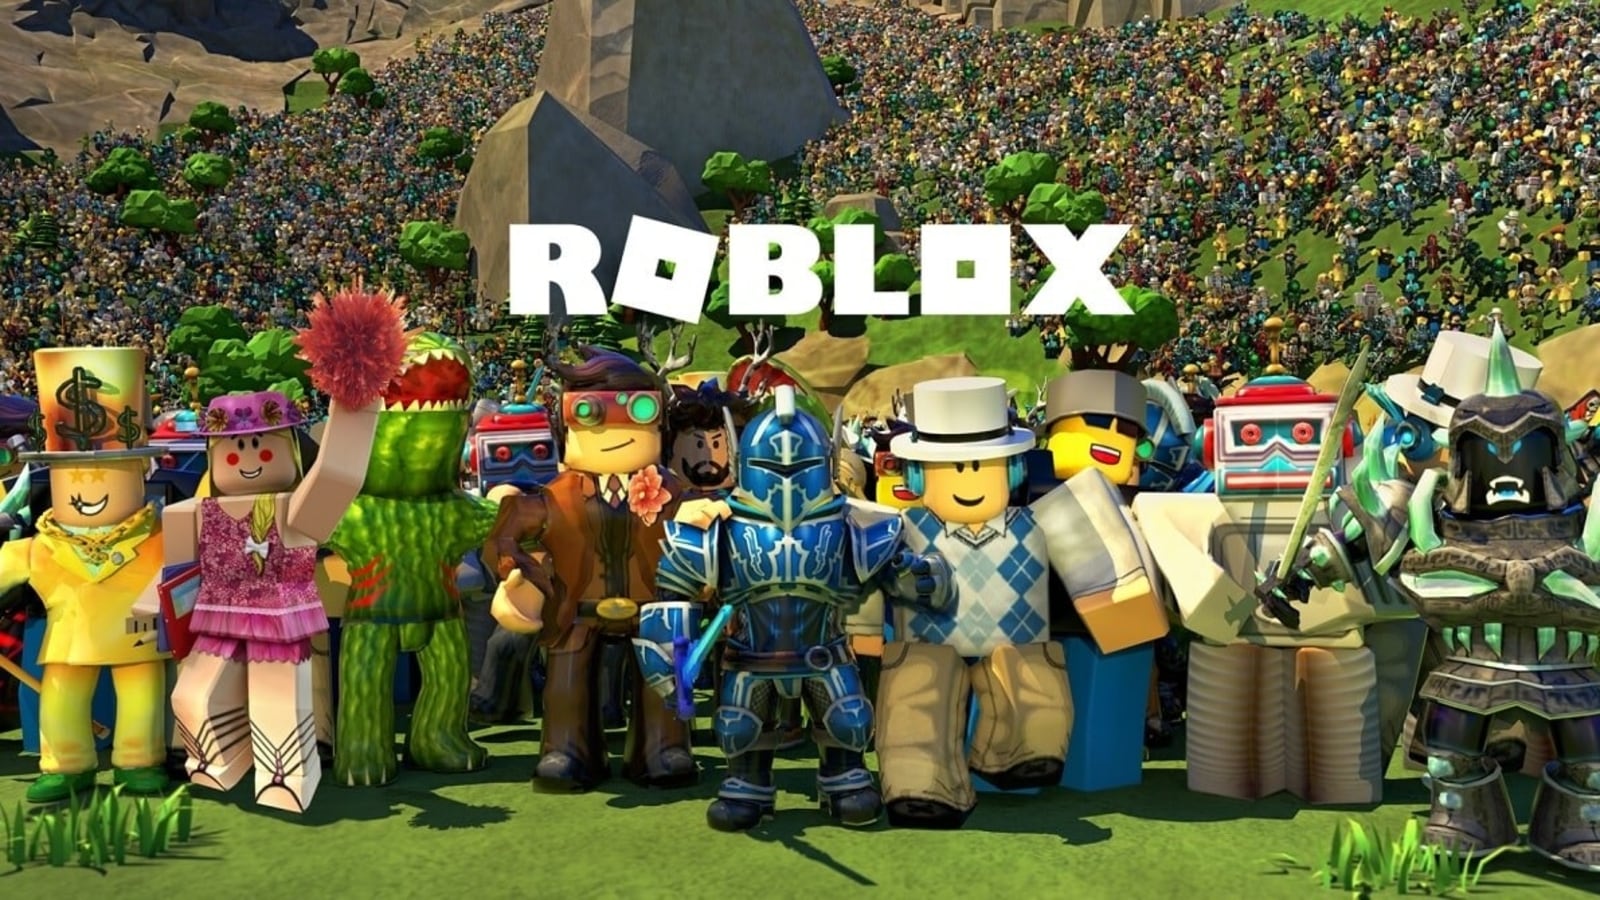 Video Online game Roblox comes with hidden dangers for kids - ABC News